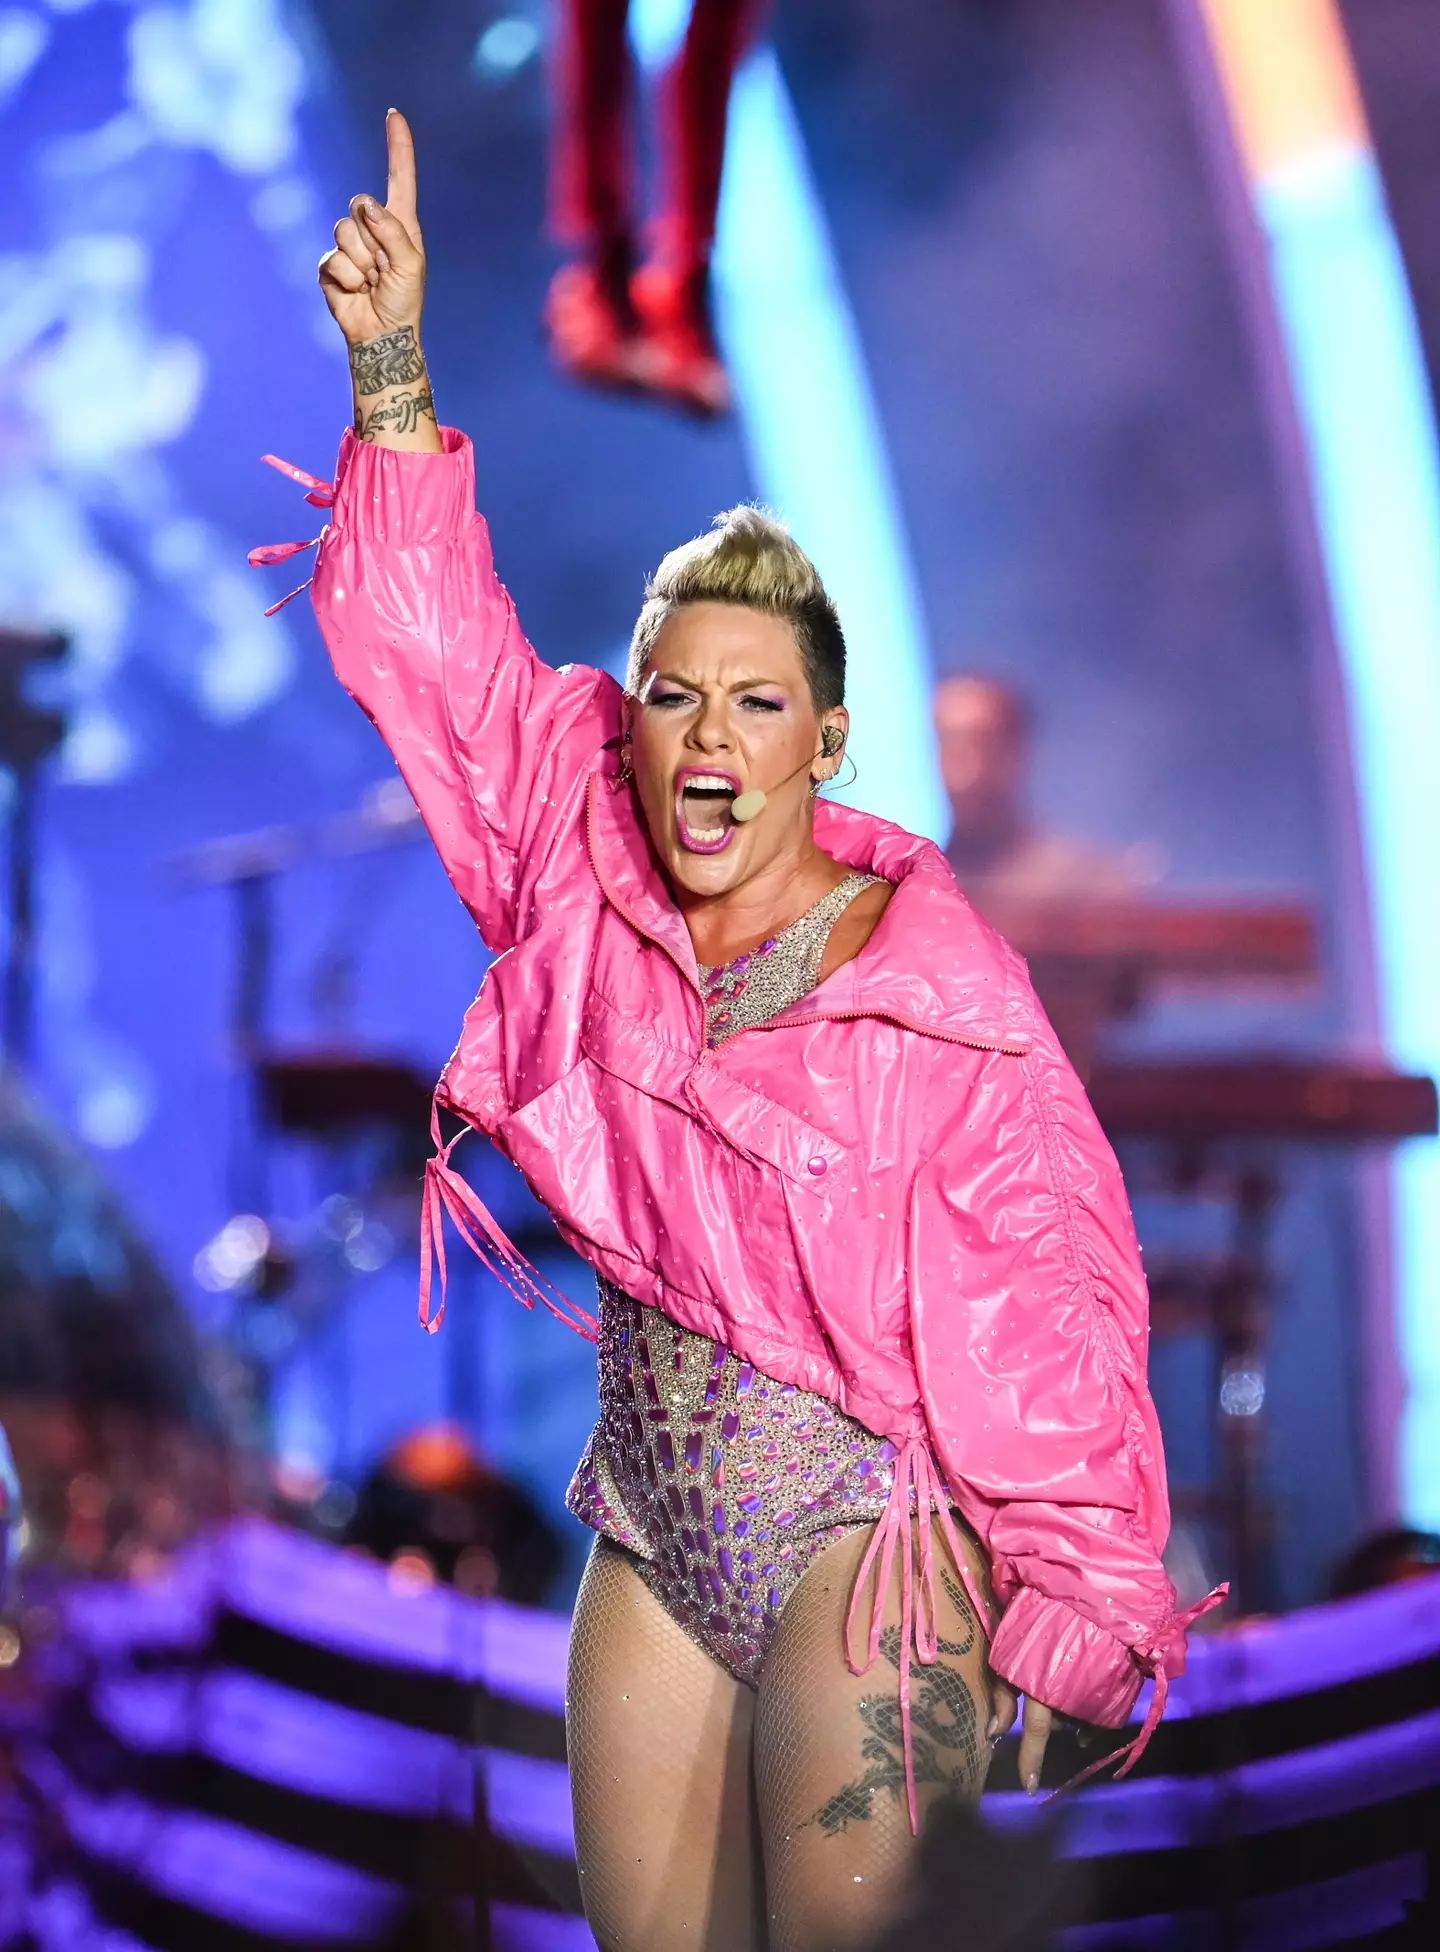 P!nk had the best response to an online troll.